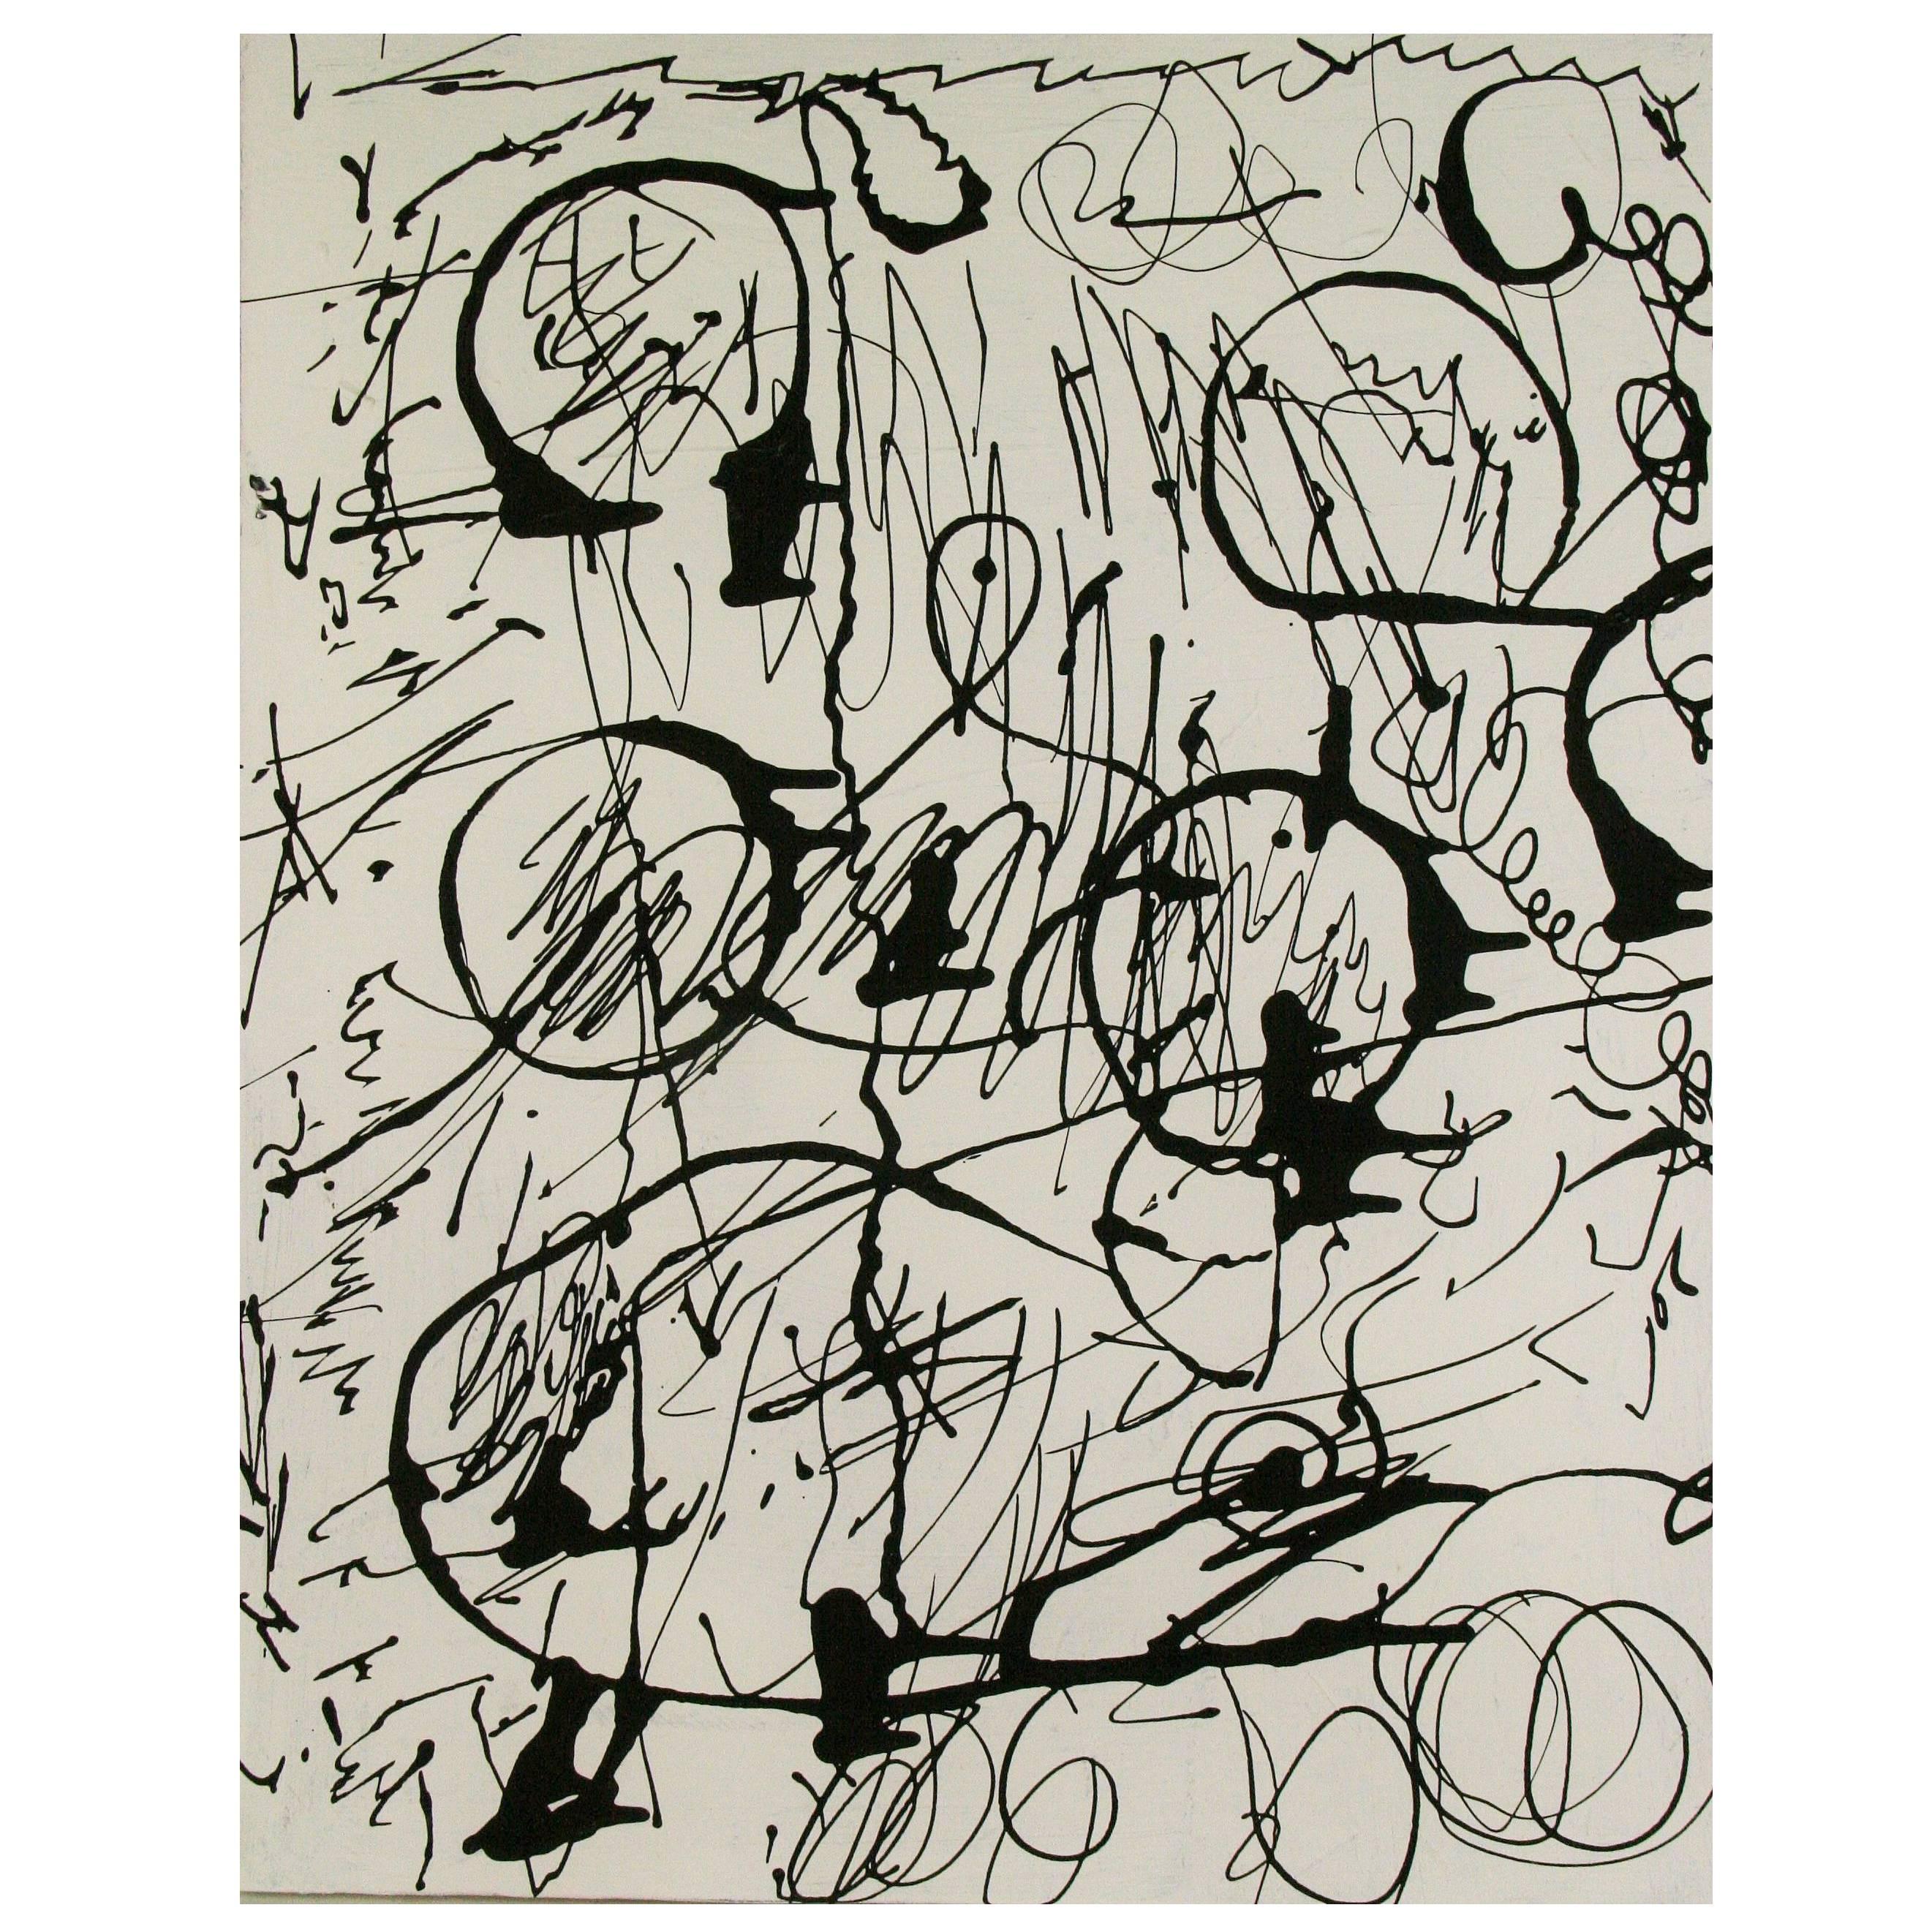 3581 a contemporary abstract expressionist painting in black acrylic on canvas. Signed by Cava.